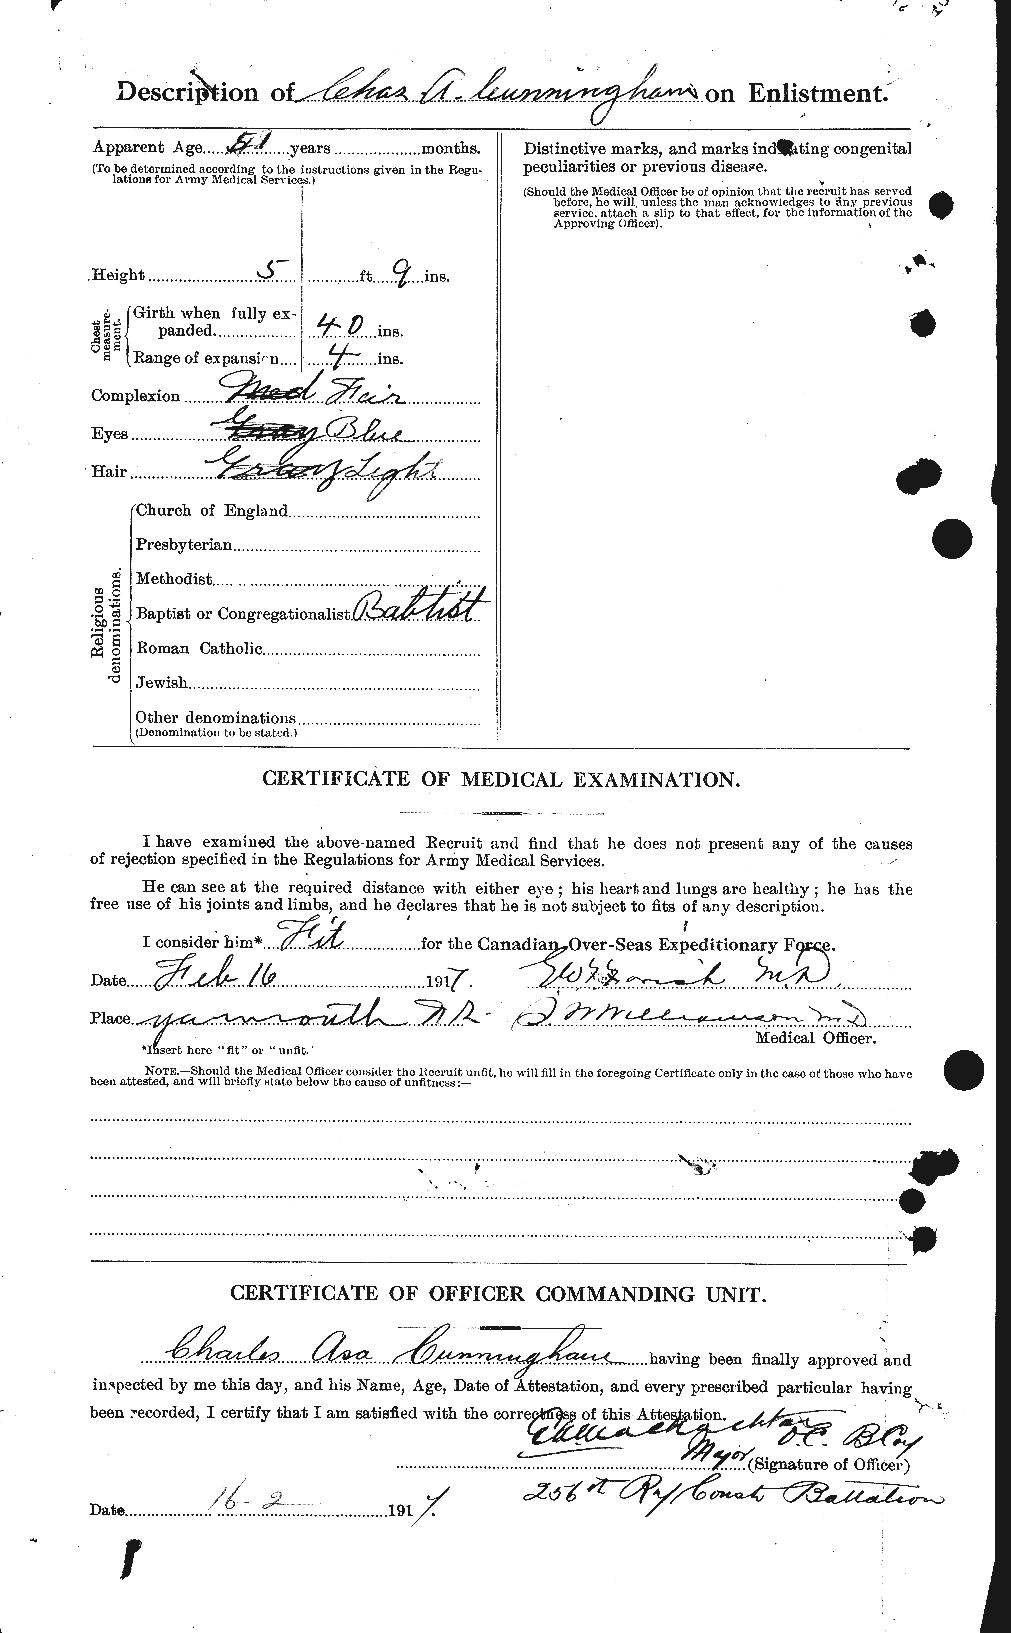 Personnel Records of the First World War - CEF 072035b